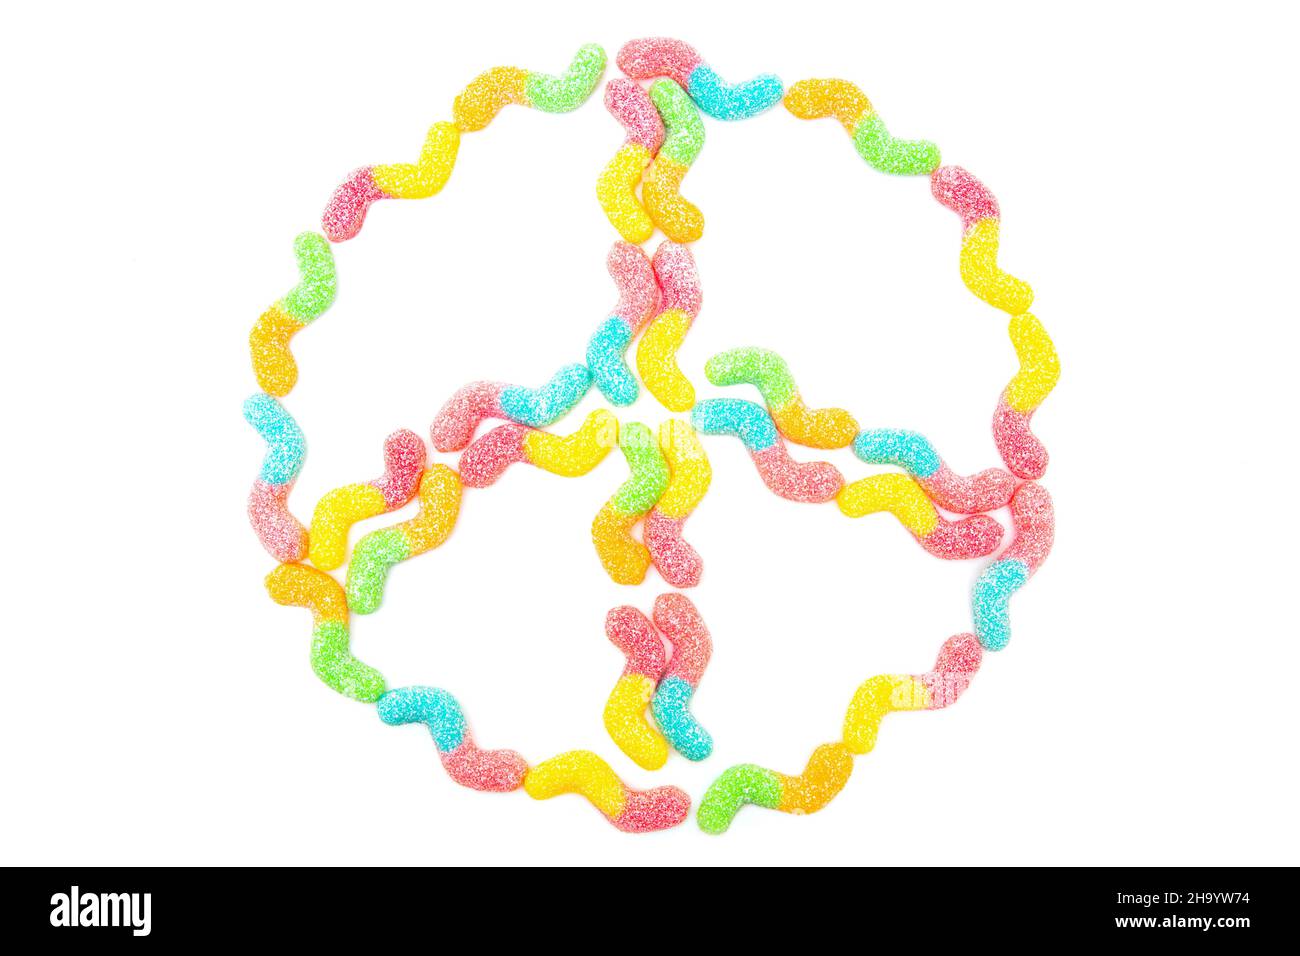 Peace symbol made from multicolored sugar coated gummy worms isolated on white. Anti-war movement concept. Stock Photo